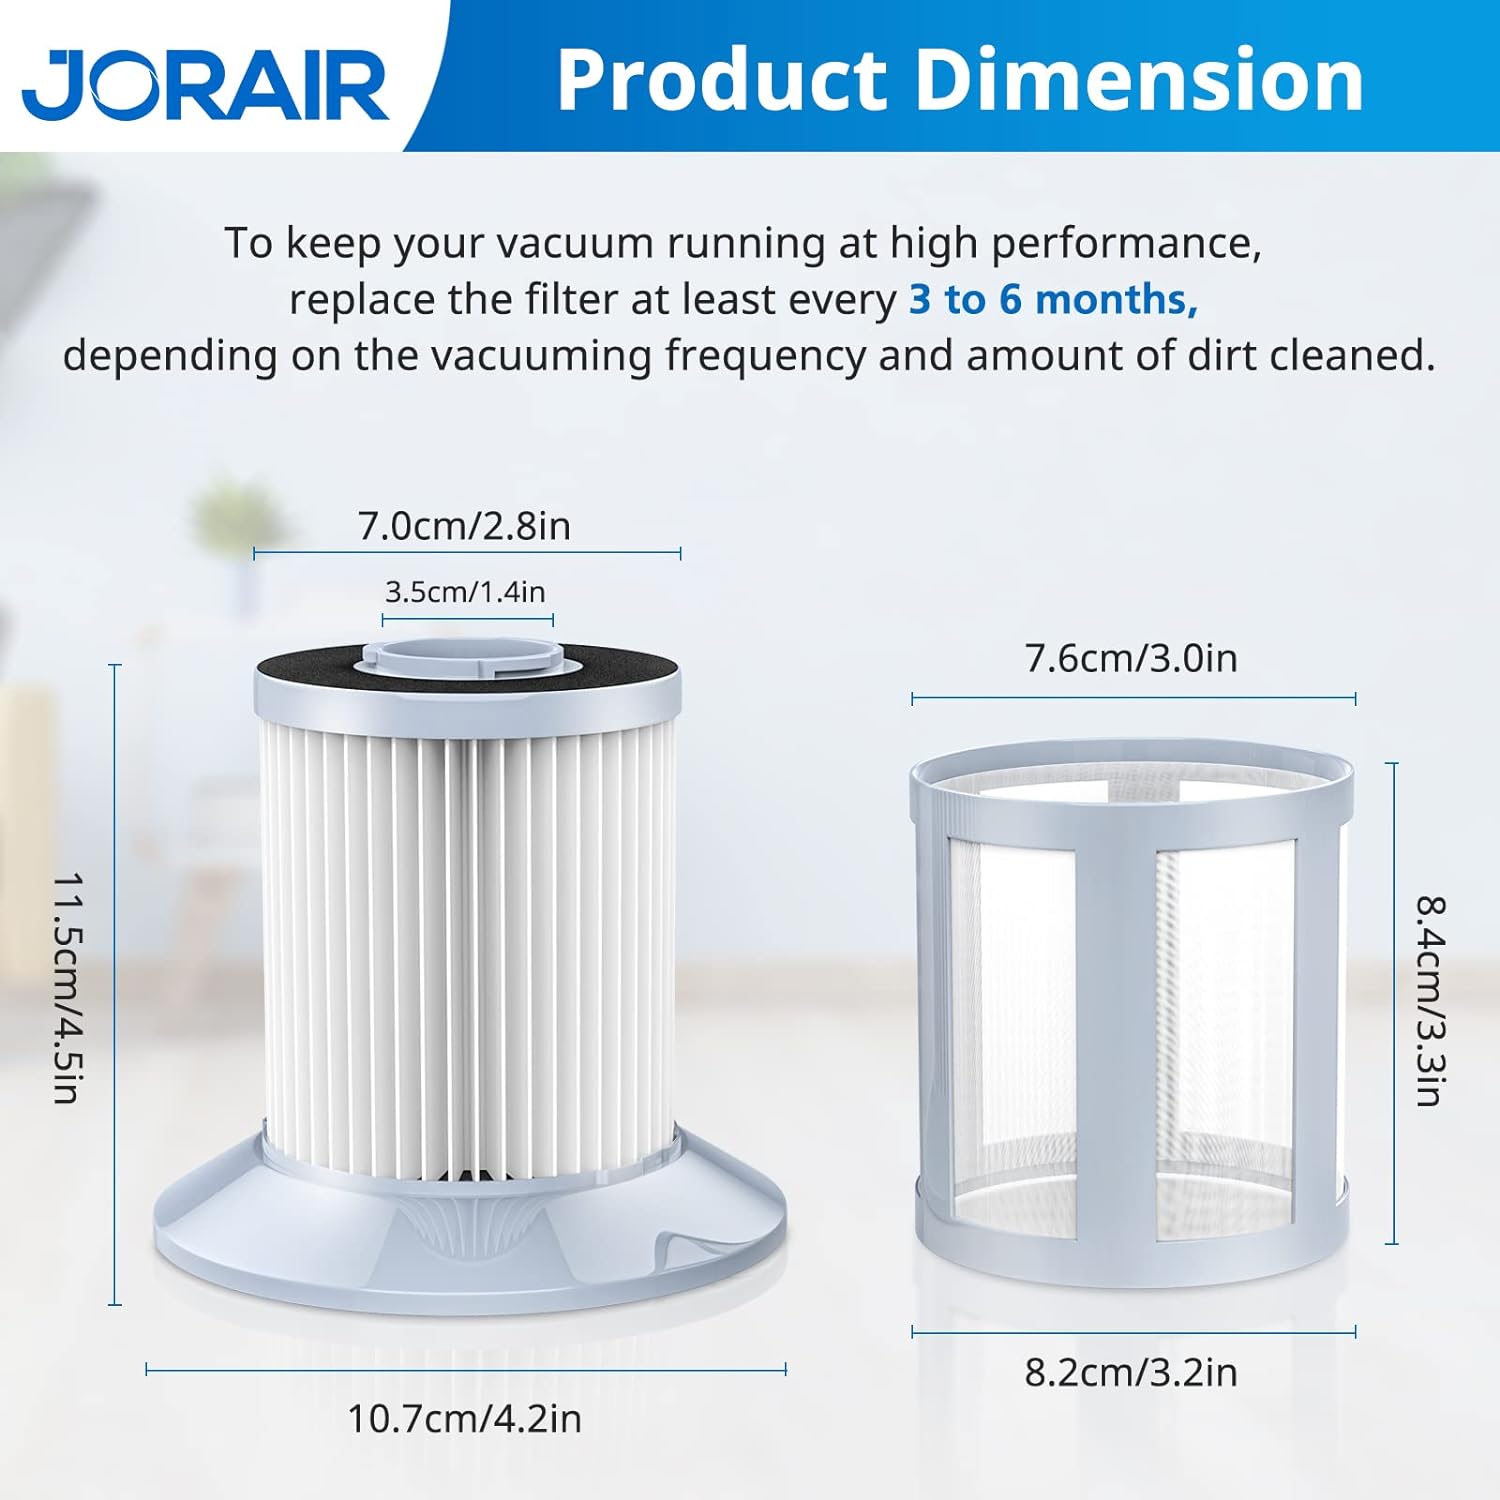 JORAIR 2156A Replacement Vacuum Filter Compatible with Bissell 2156A, 1665, 16652, 1665W Zing Canister Vacuum Cleaner, Compare to Part